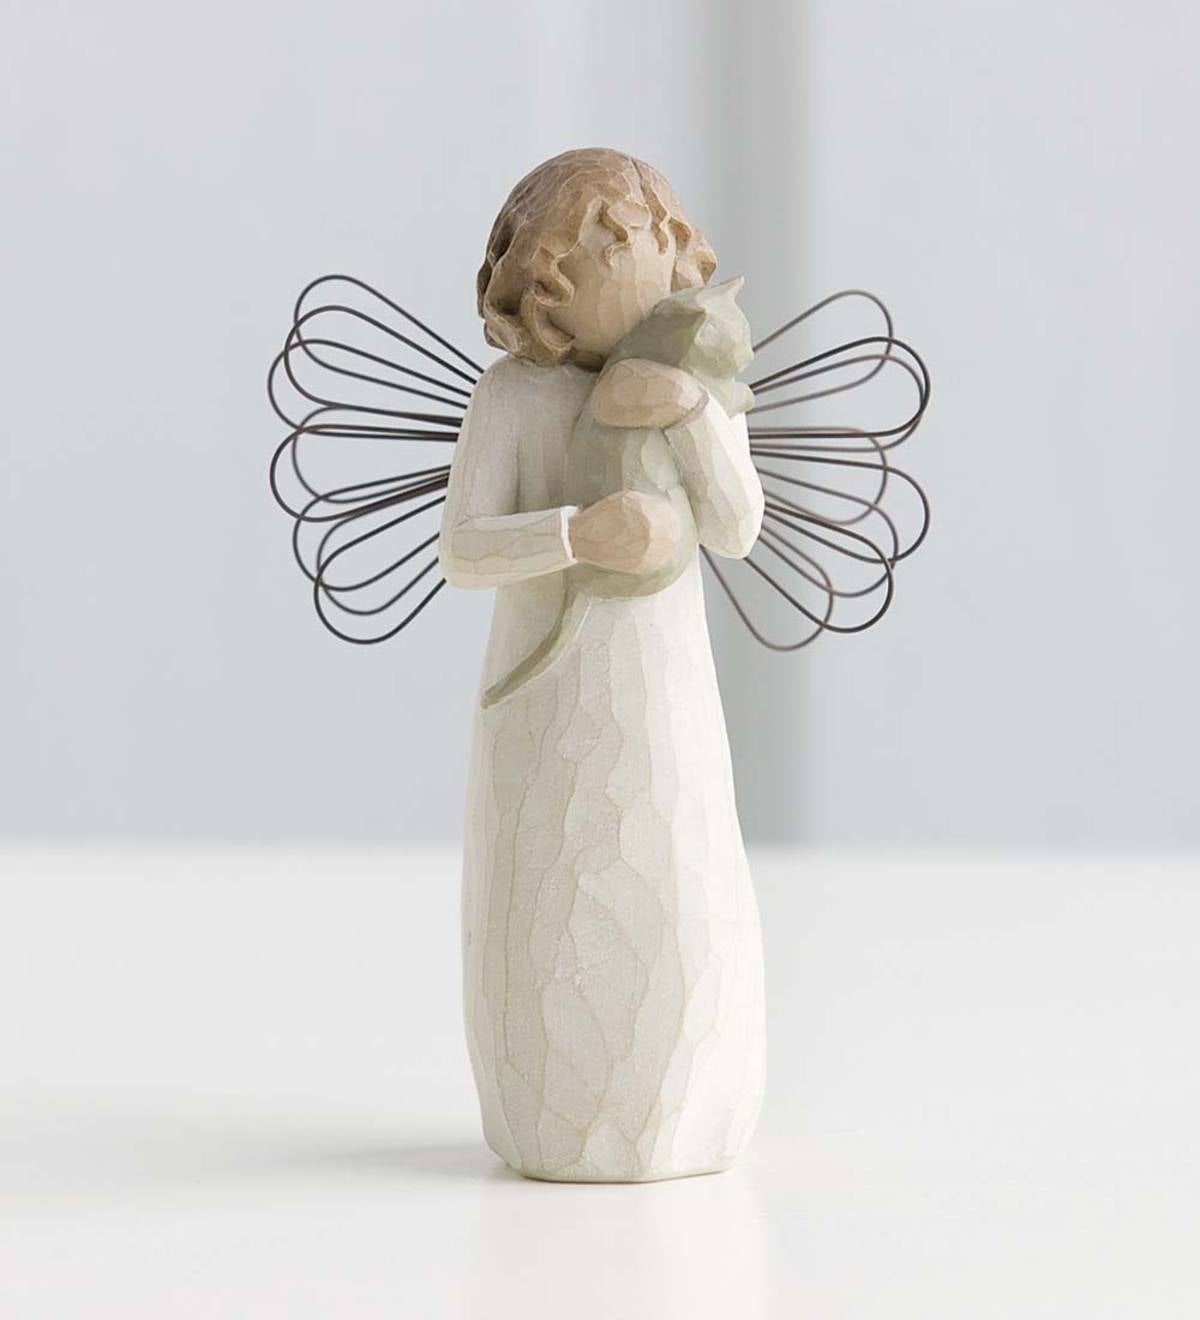 Willow Tree "With Affection" Figurine